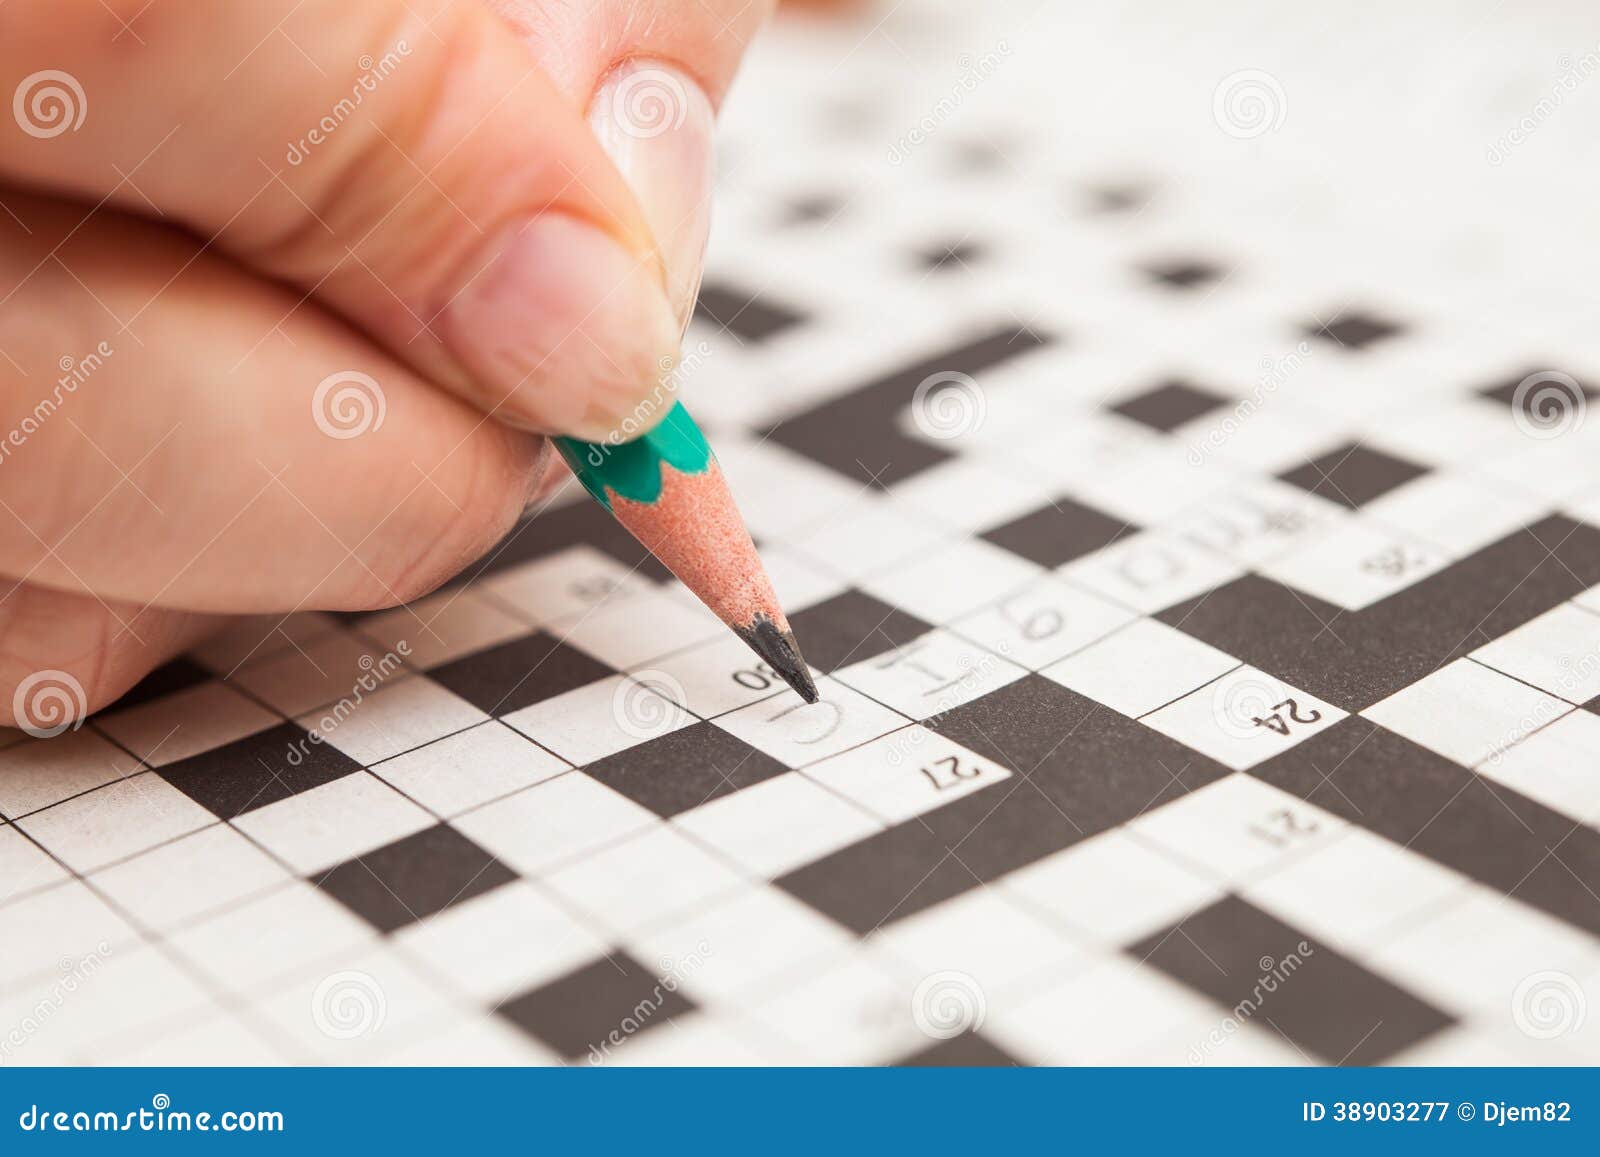 Crossword puzzle close up stock image Image of activity 38903277